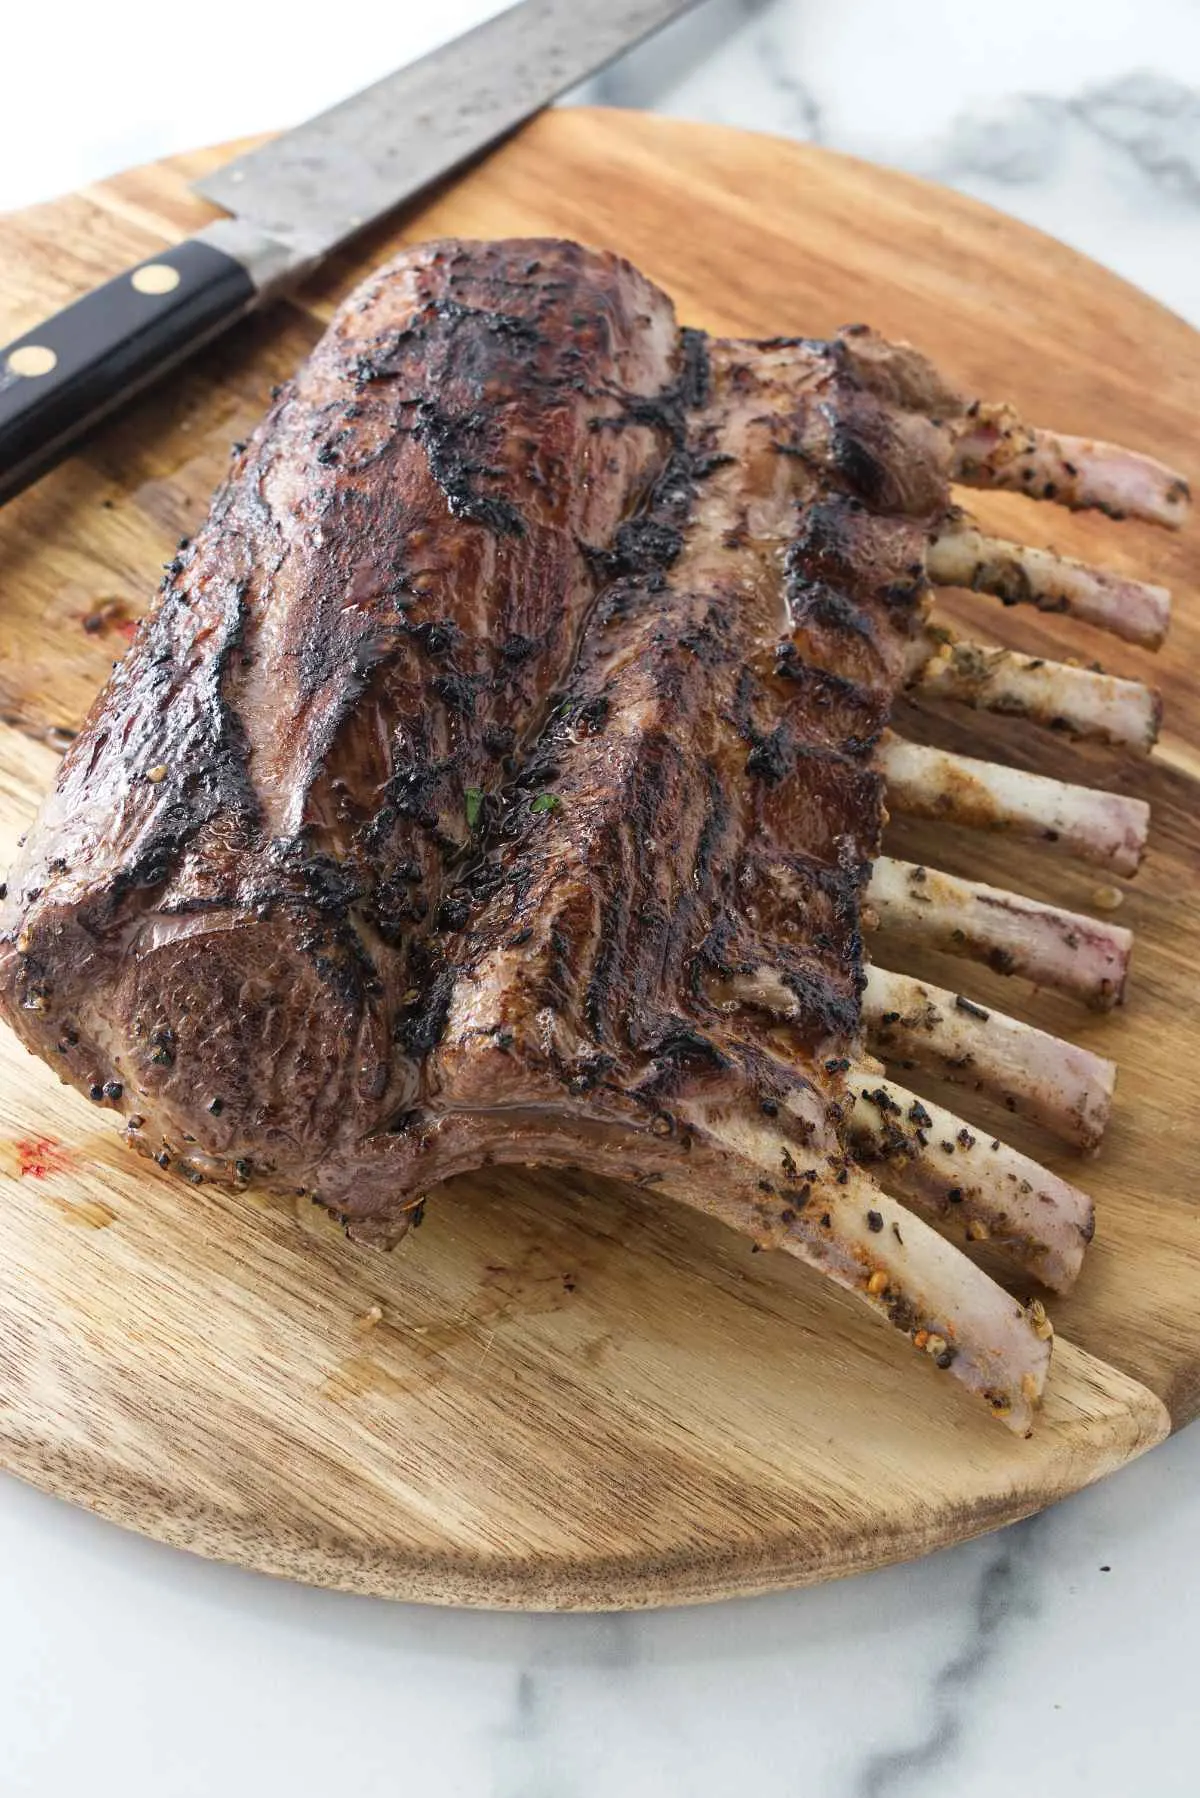 A Frenched rack of lamb on a cutting board.